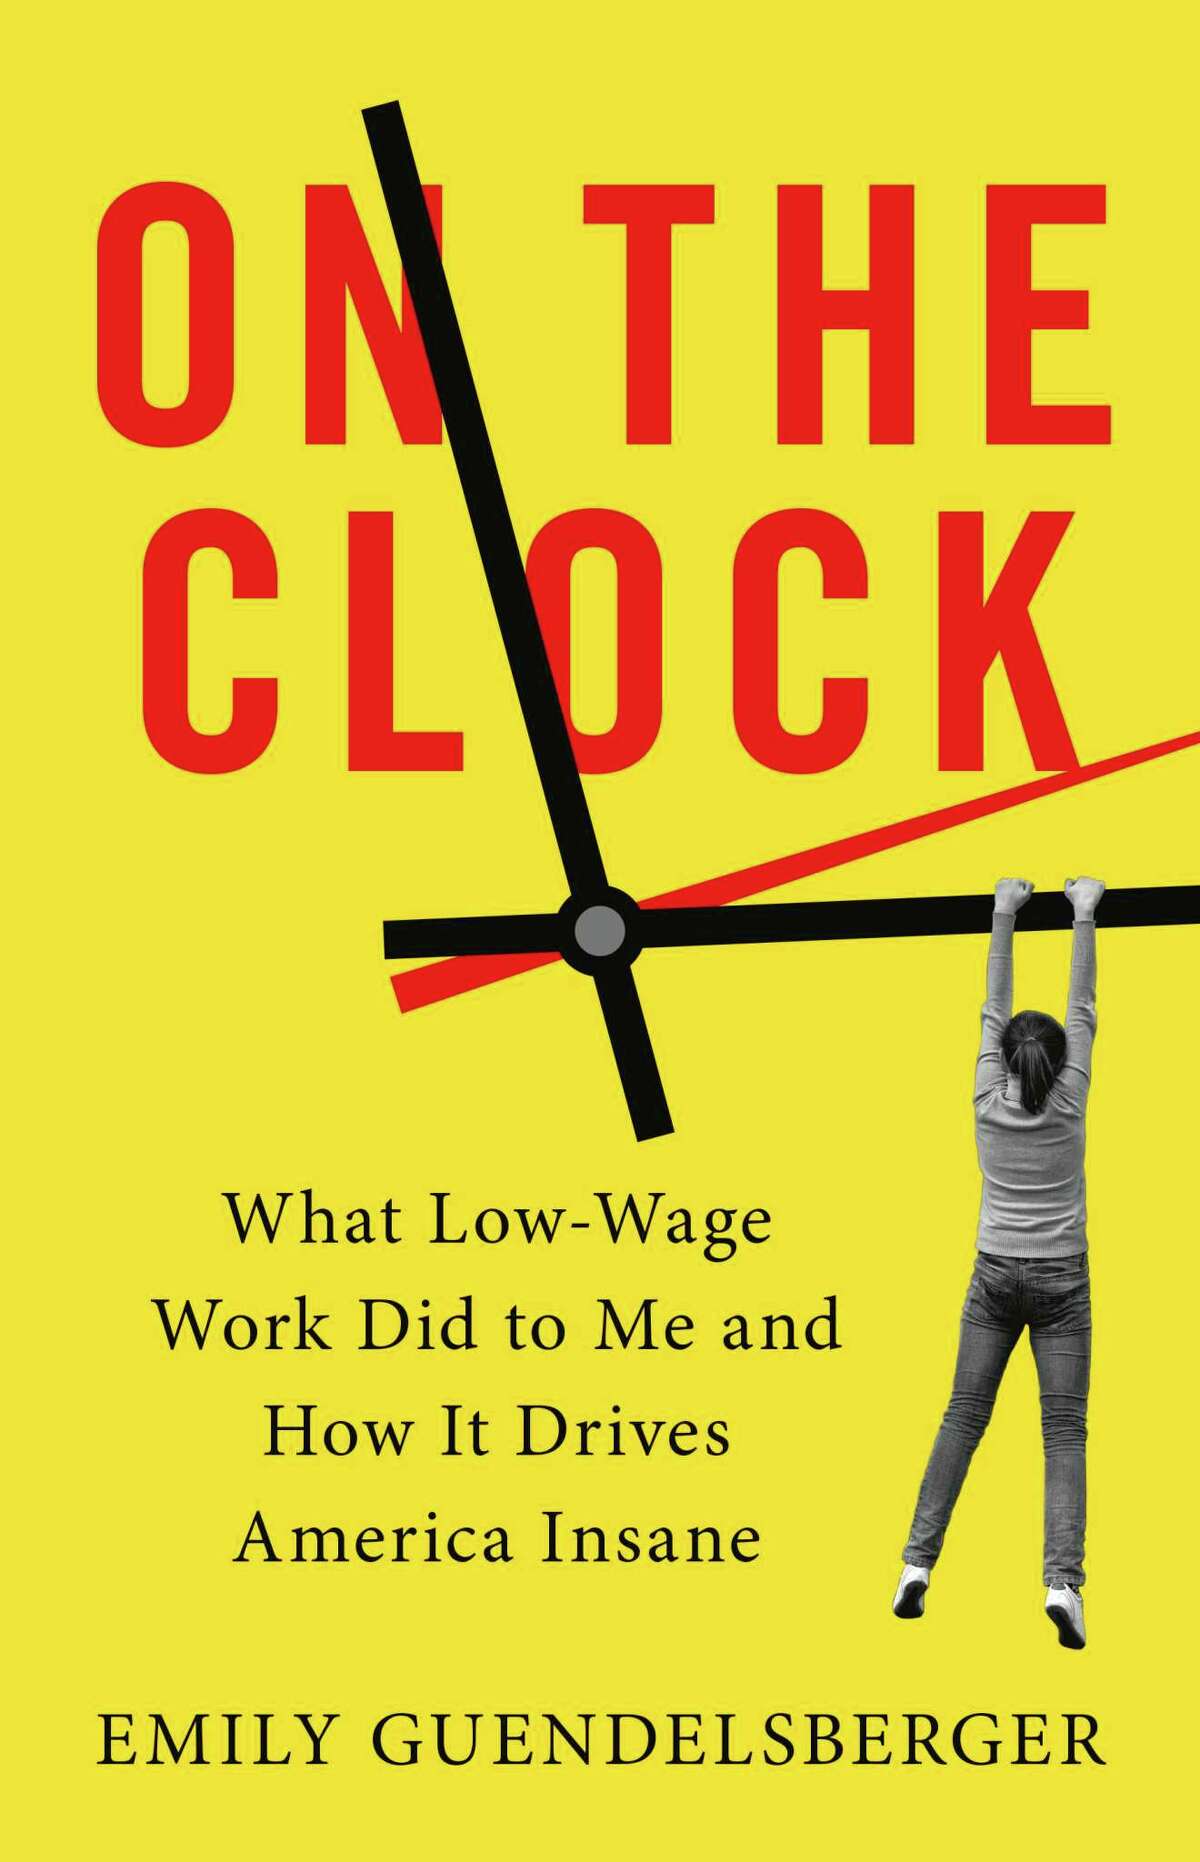 “On the Clock: What Low-Wage Did to Me and How it Drives America Insane”By Emily Guendelsberger